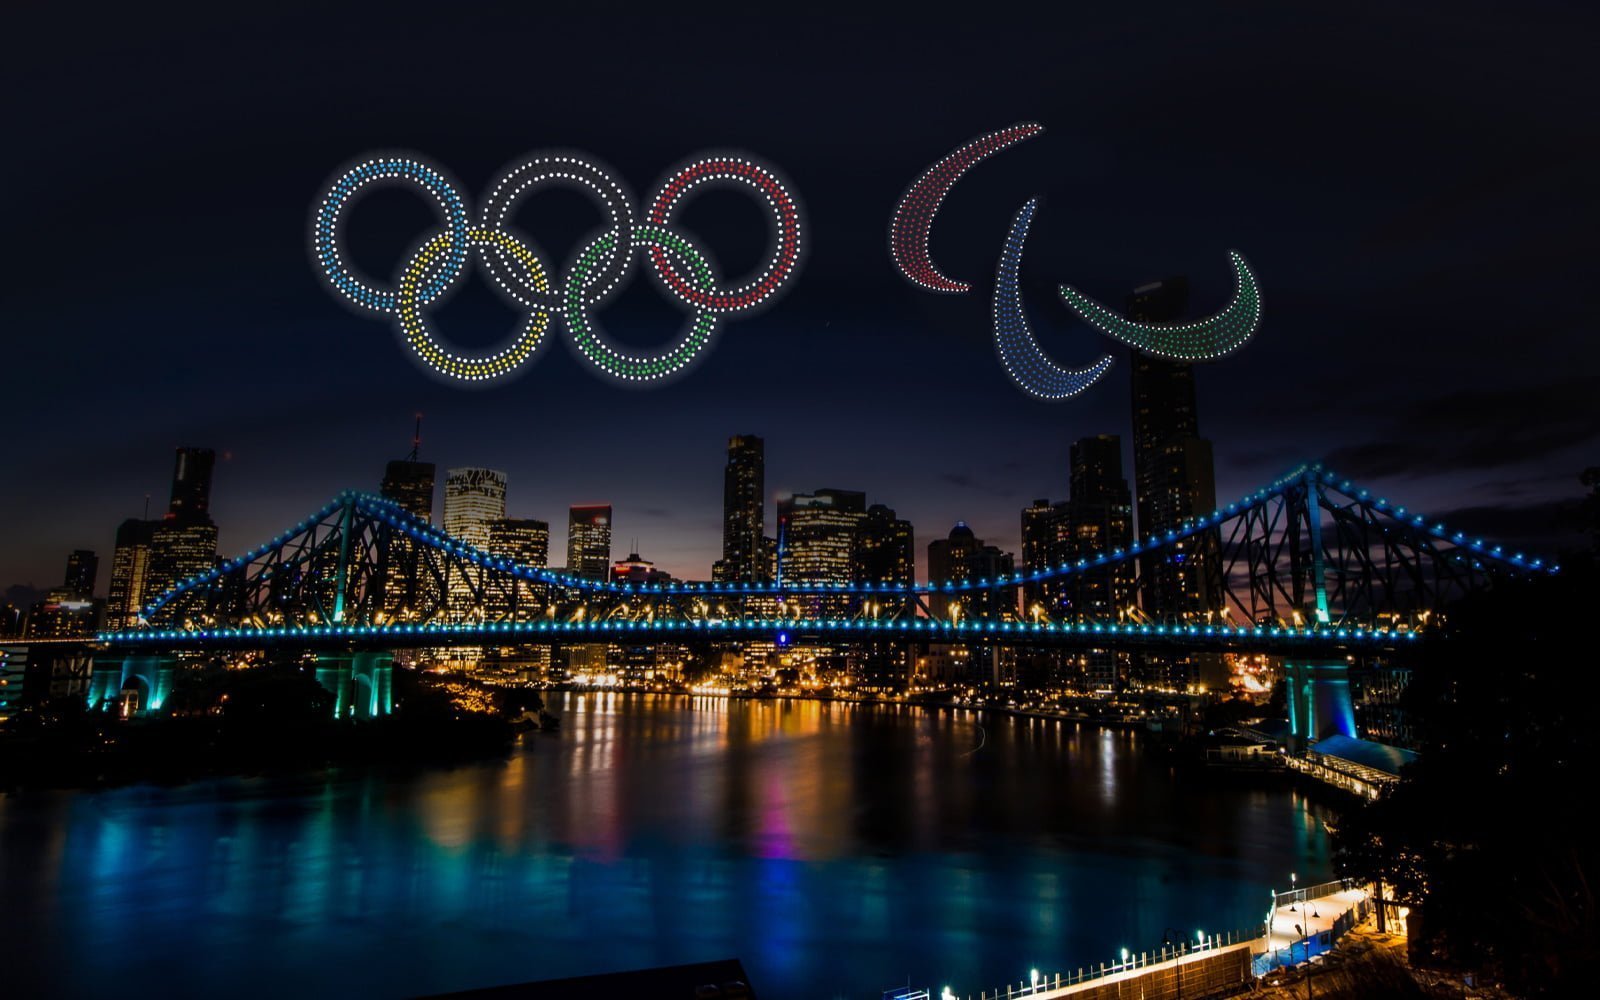 Olympic Rings And Paralympic Agitos Get Set To Make Their Queensland Debut